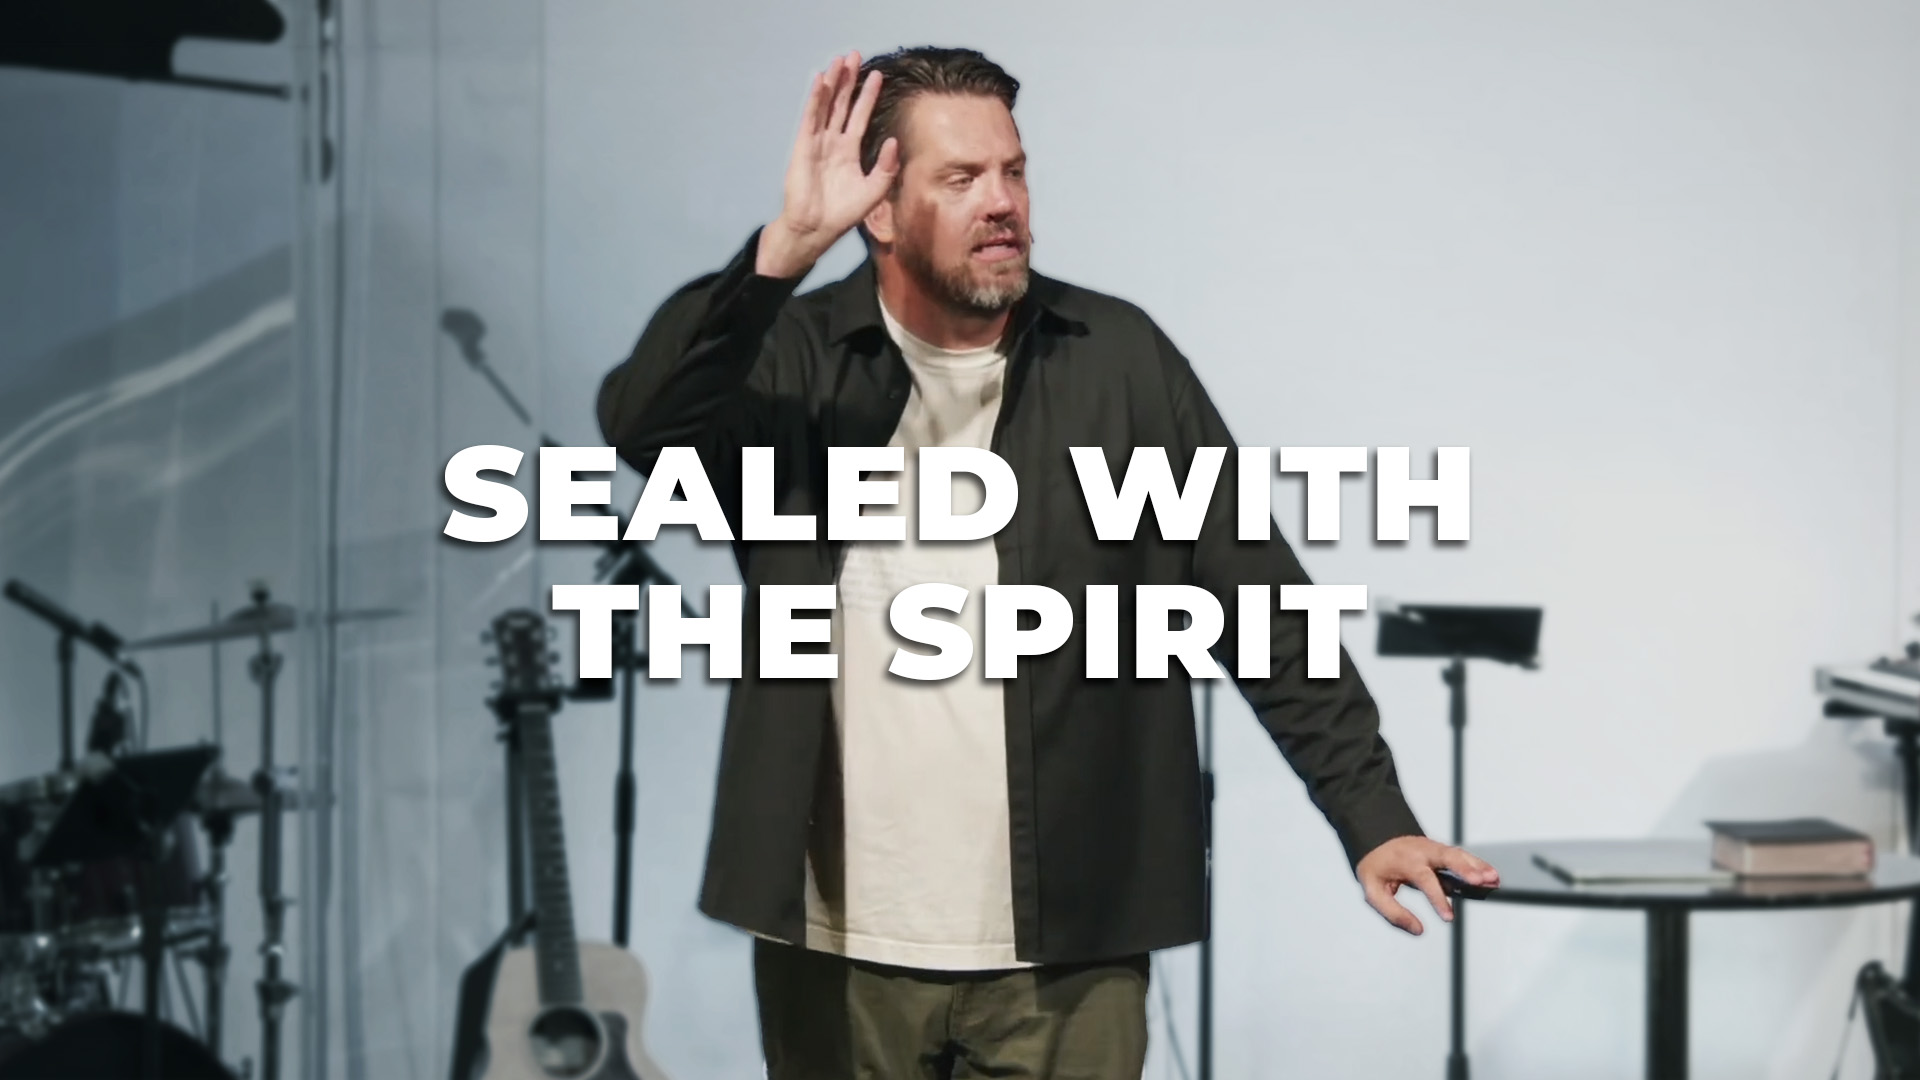 Sealed with the Spirit